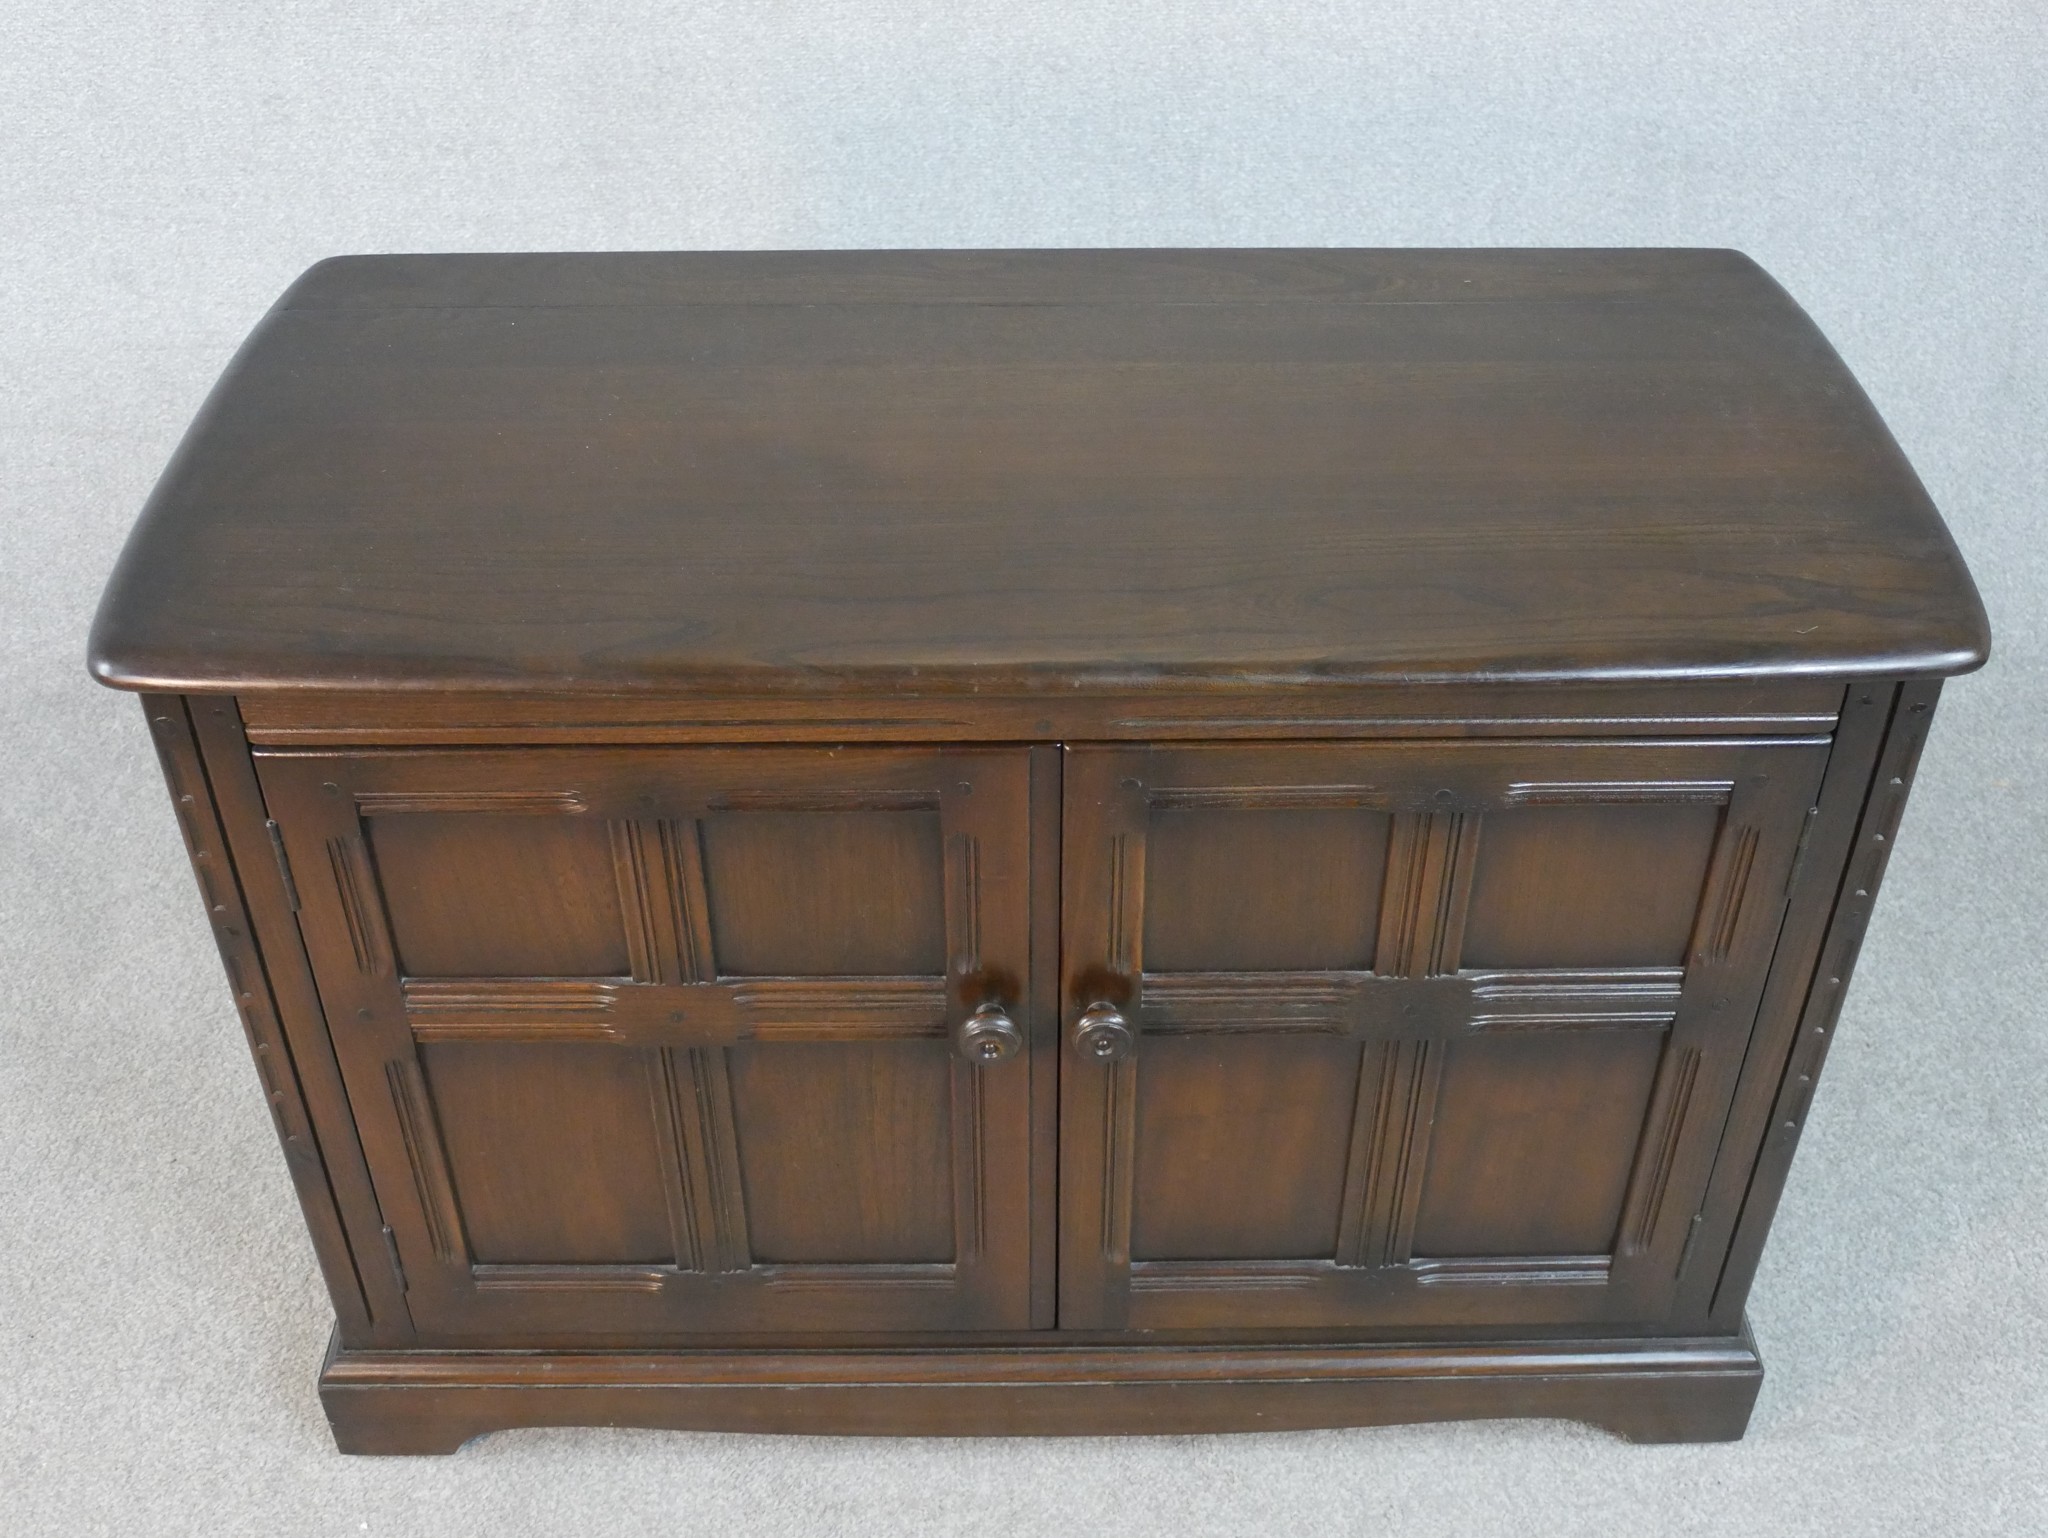 A mid century oak Ercol sideboard in the country antique style. H.70 W.103 D.50cm - Image 2 of 7